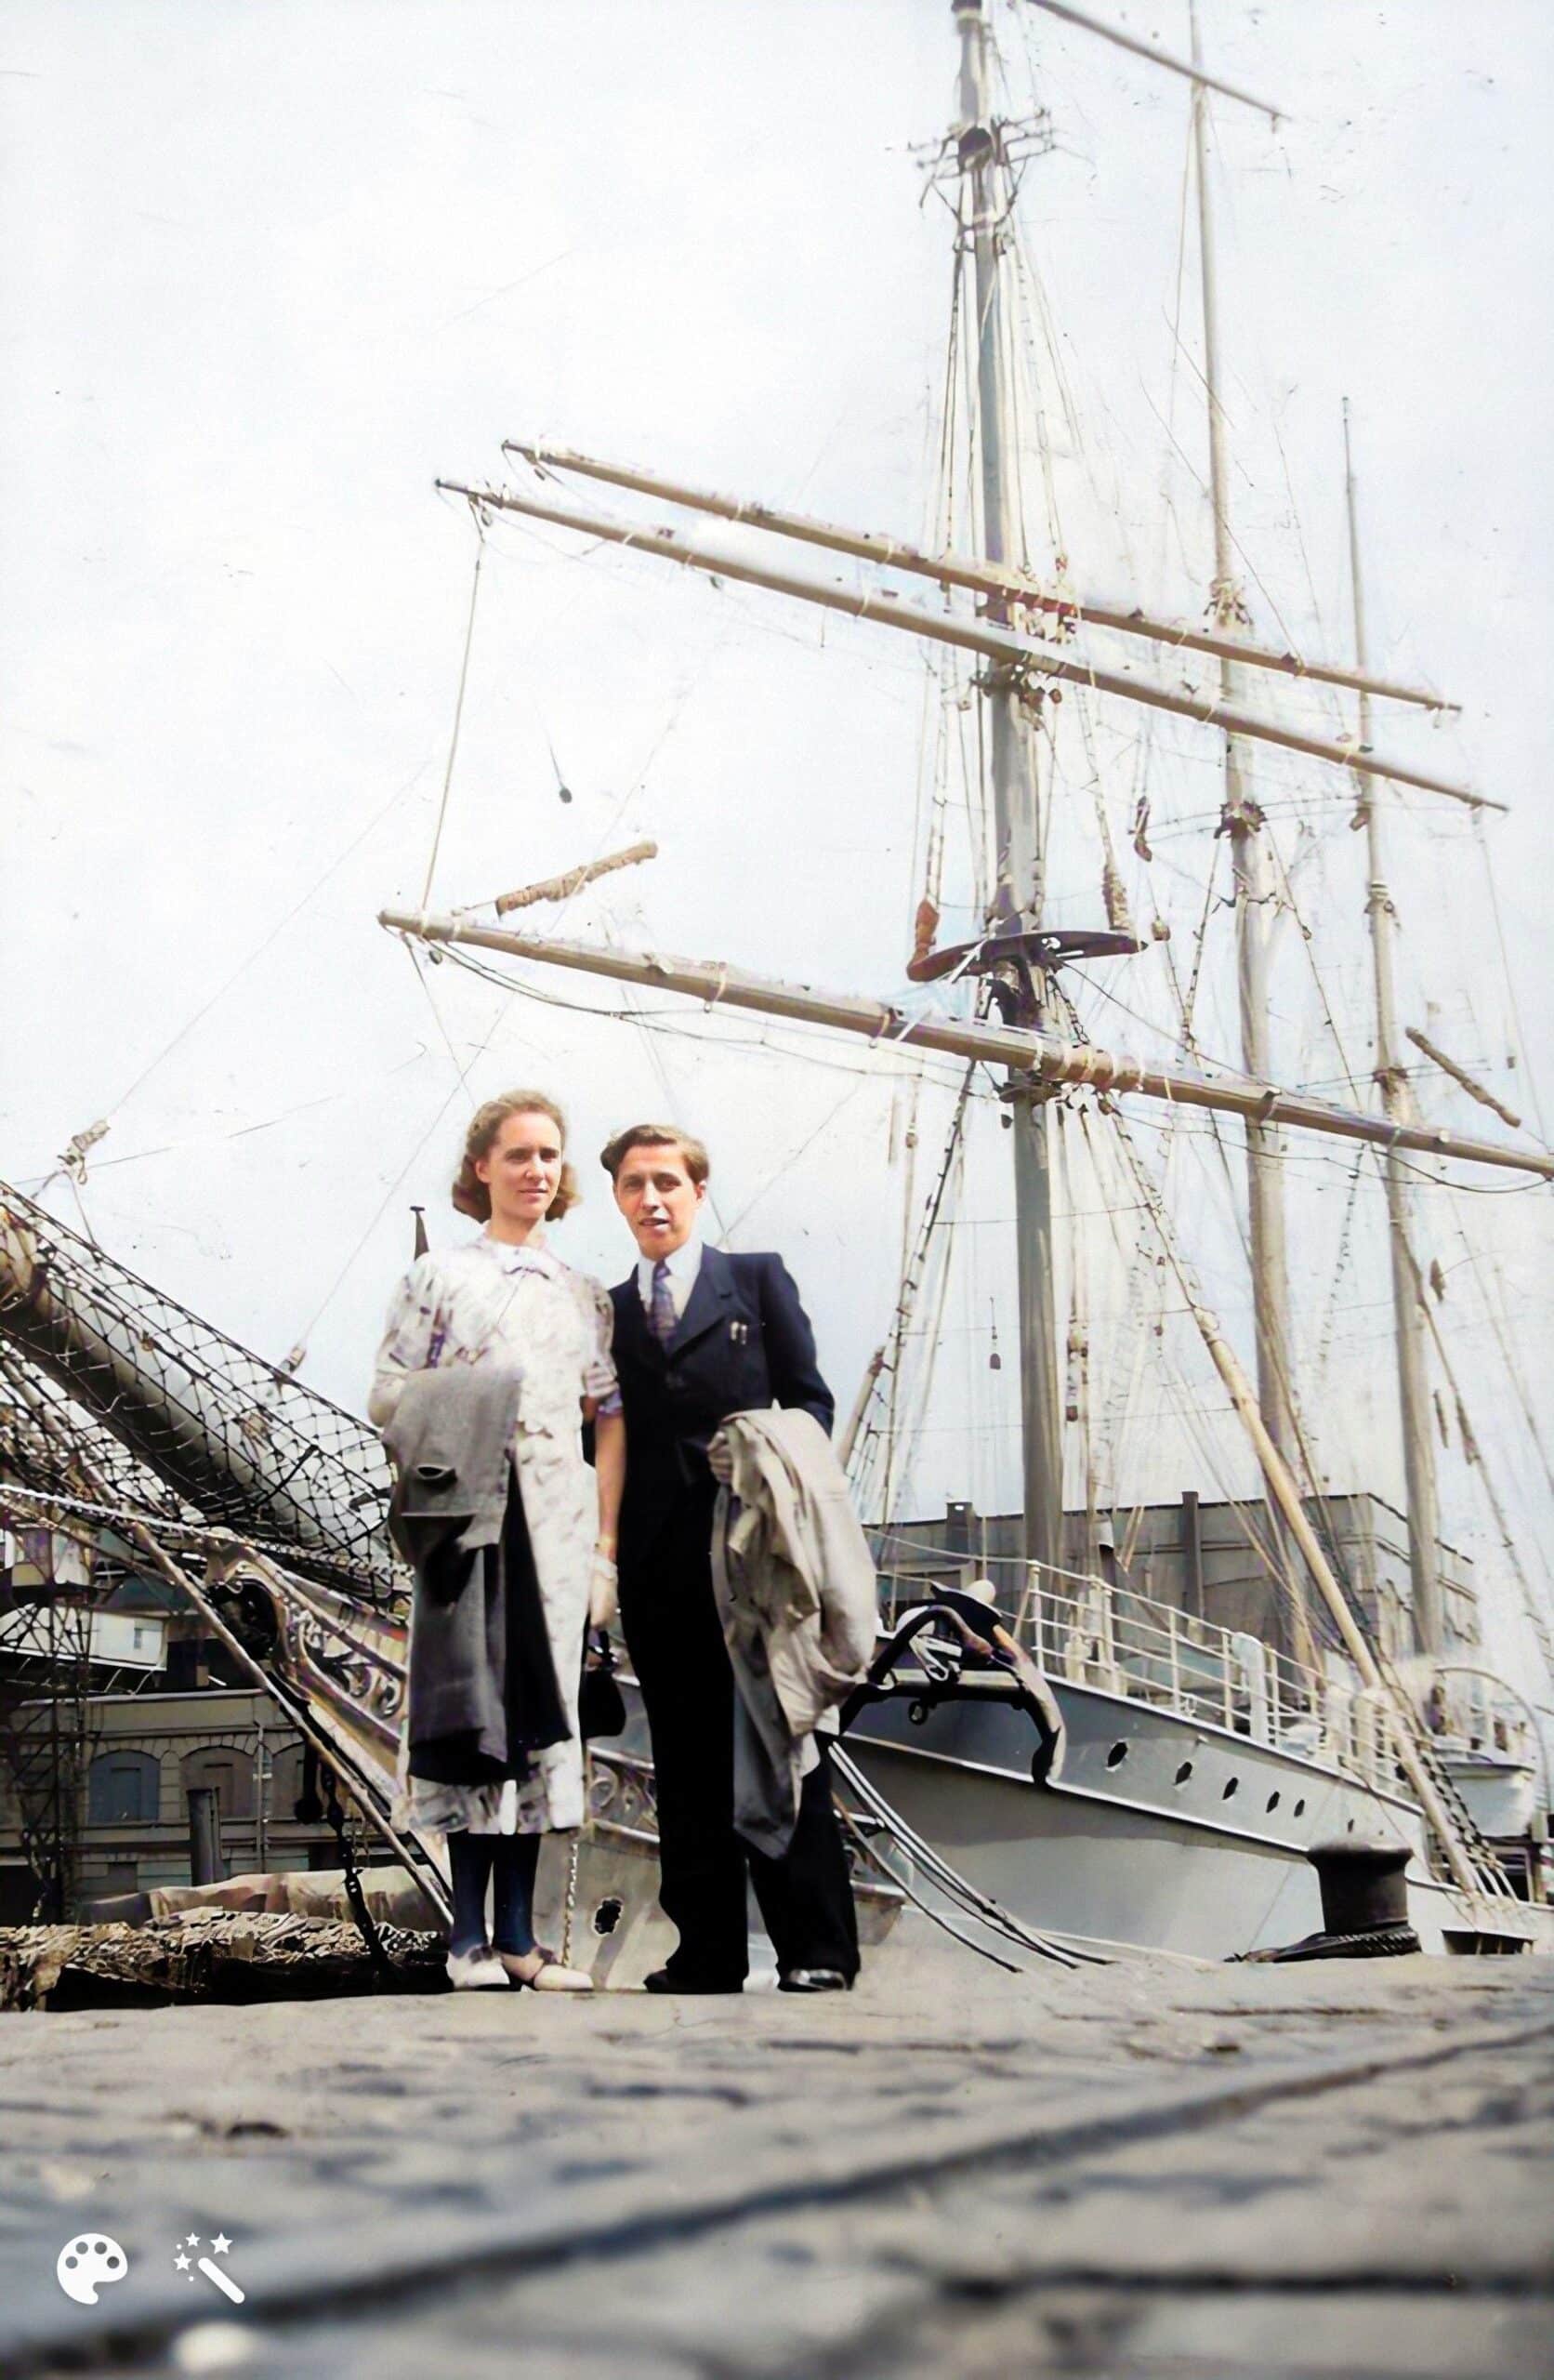 Alphonse and Marthe in Antwerp on August 13, 1939. Photo enhanced and colorized by MyHeritage.